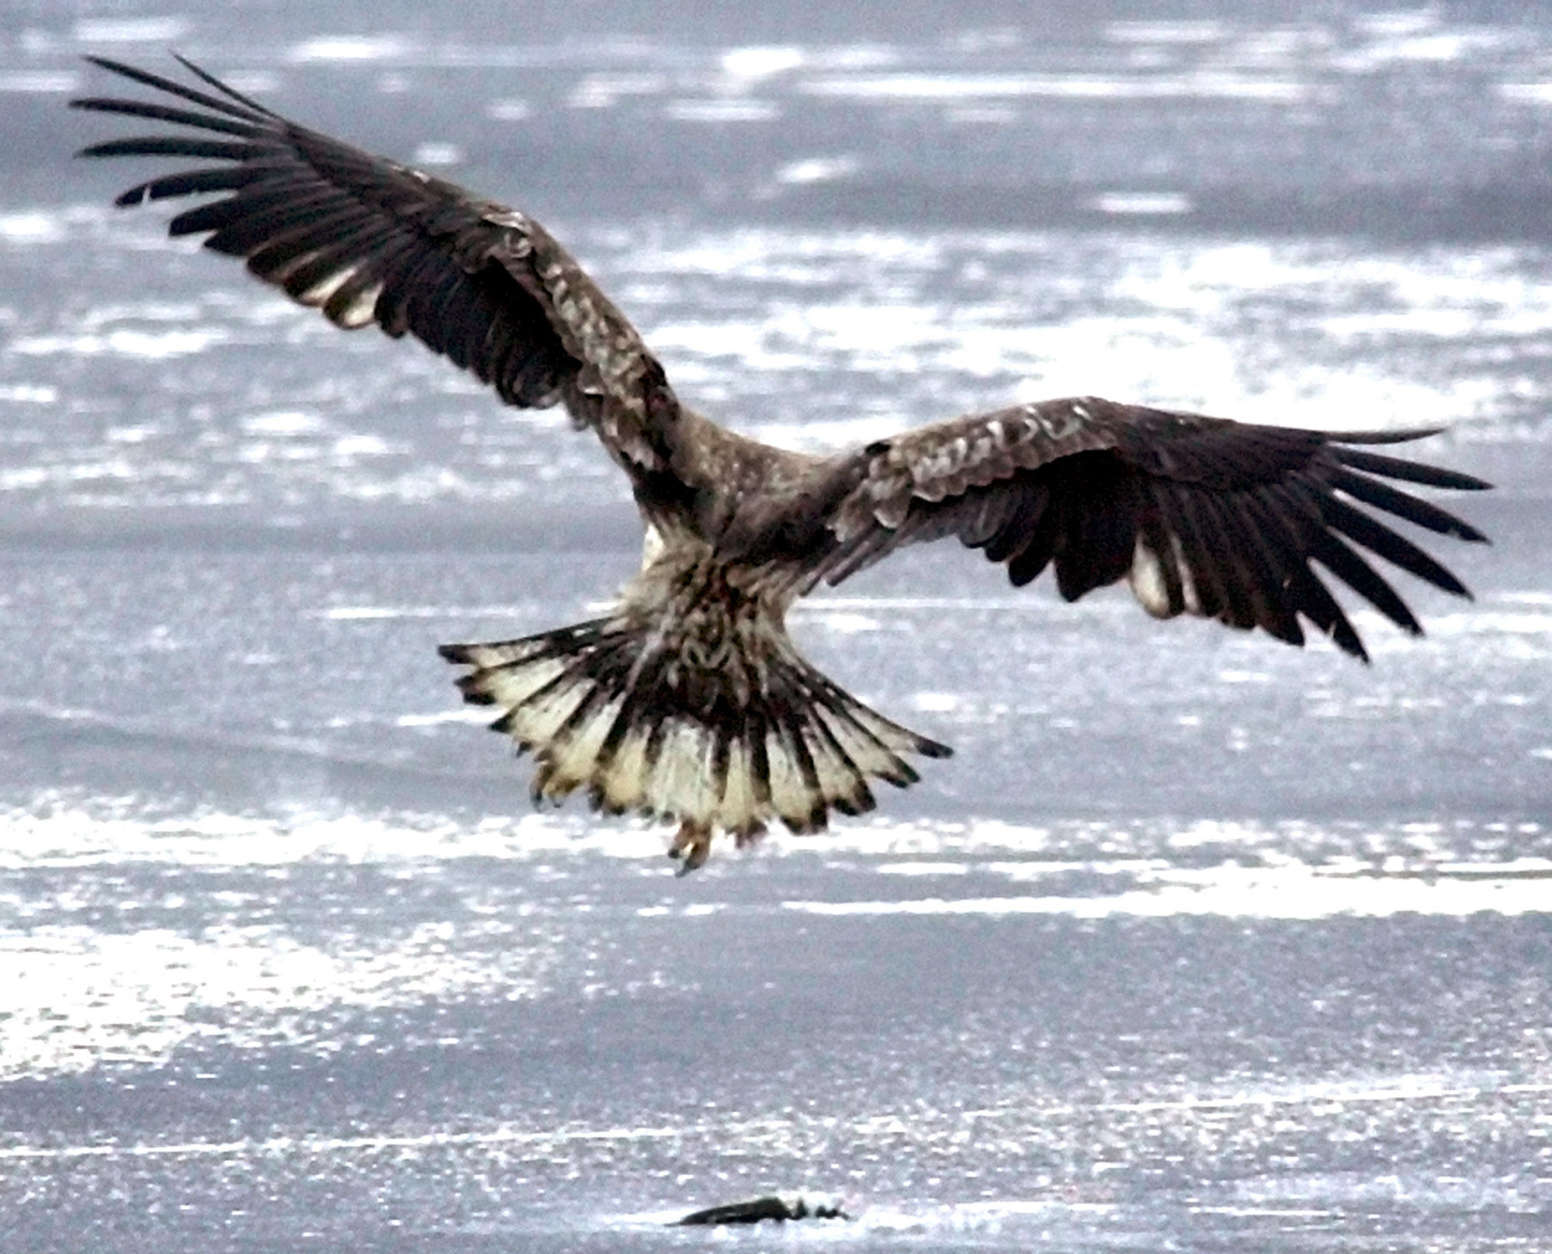 An osprey comes in for a landing after spotting a piece of fish discarded by an ice-fisherman the night before on Center Pond, Tuesday morning, Feb. 19, 2002, in Phippsburg, Maine. Ospreys have a wingspan of five to six feet.  (AP Photo/Robert F. Bukaty)